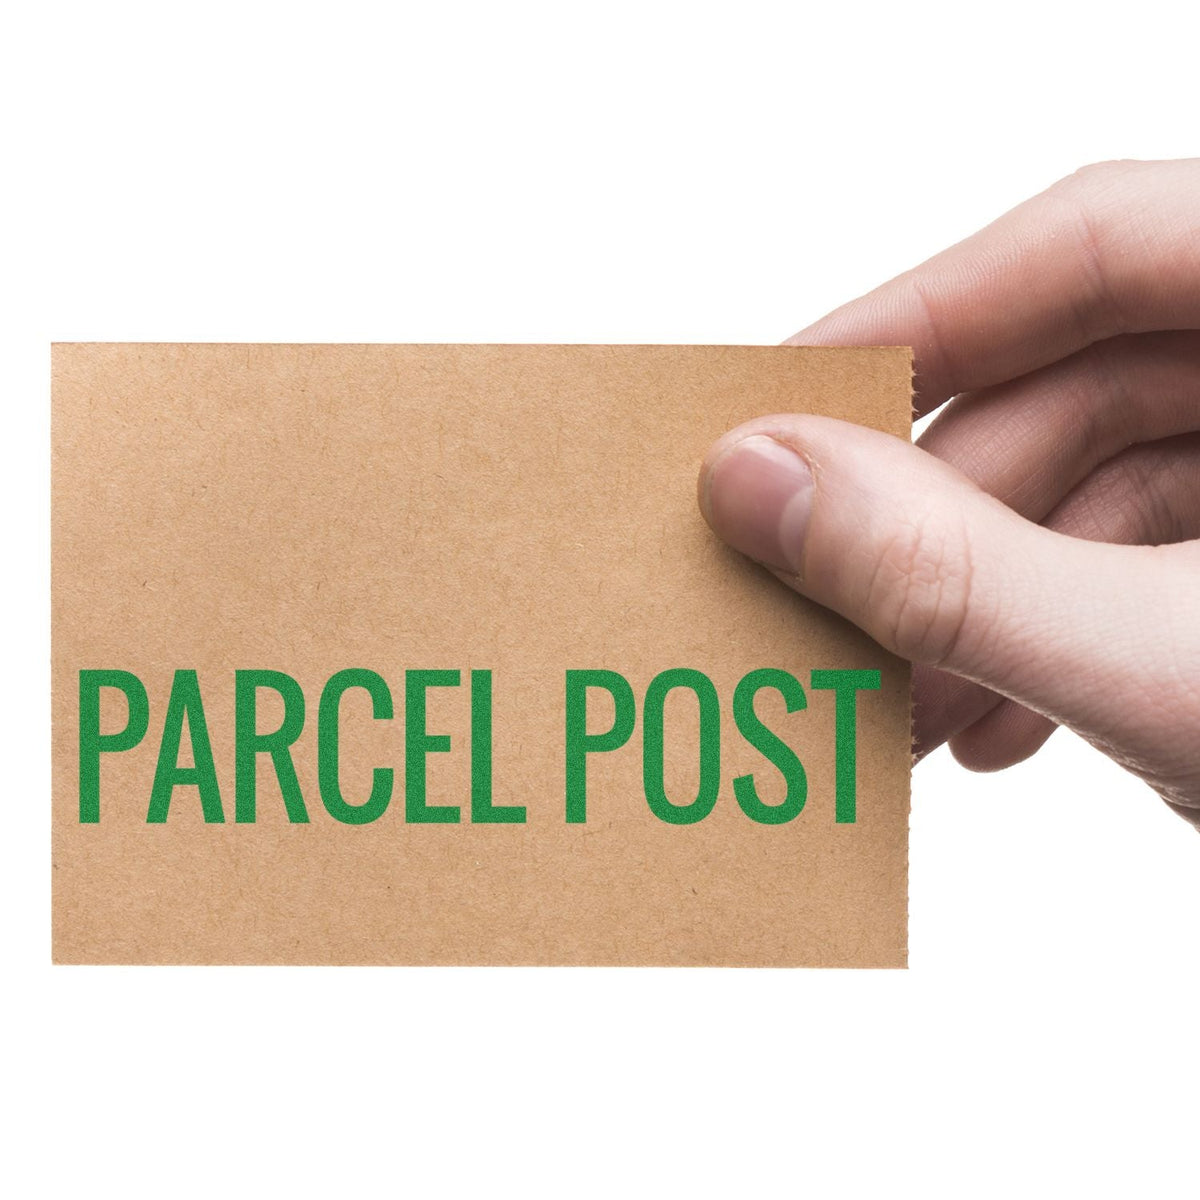 Self-Inking Parcel Post Stamp In Use